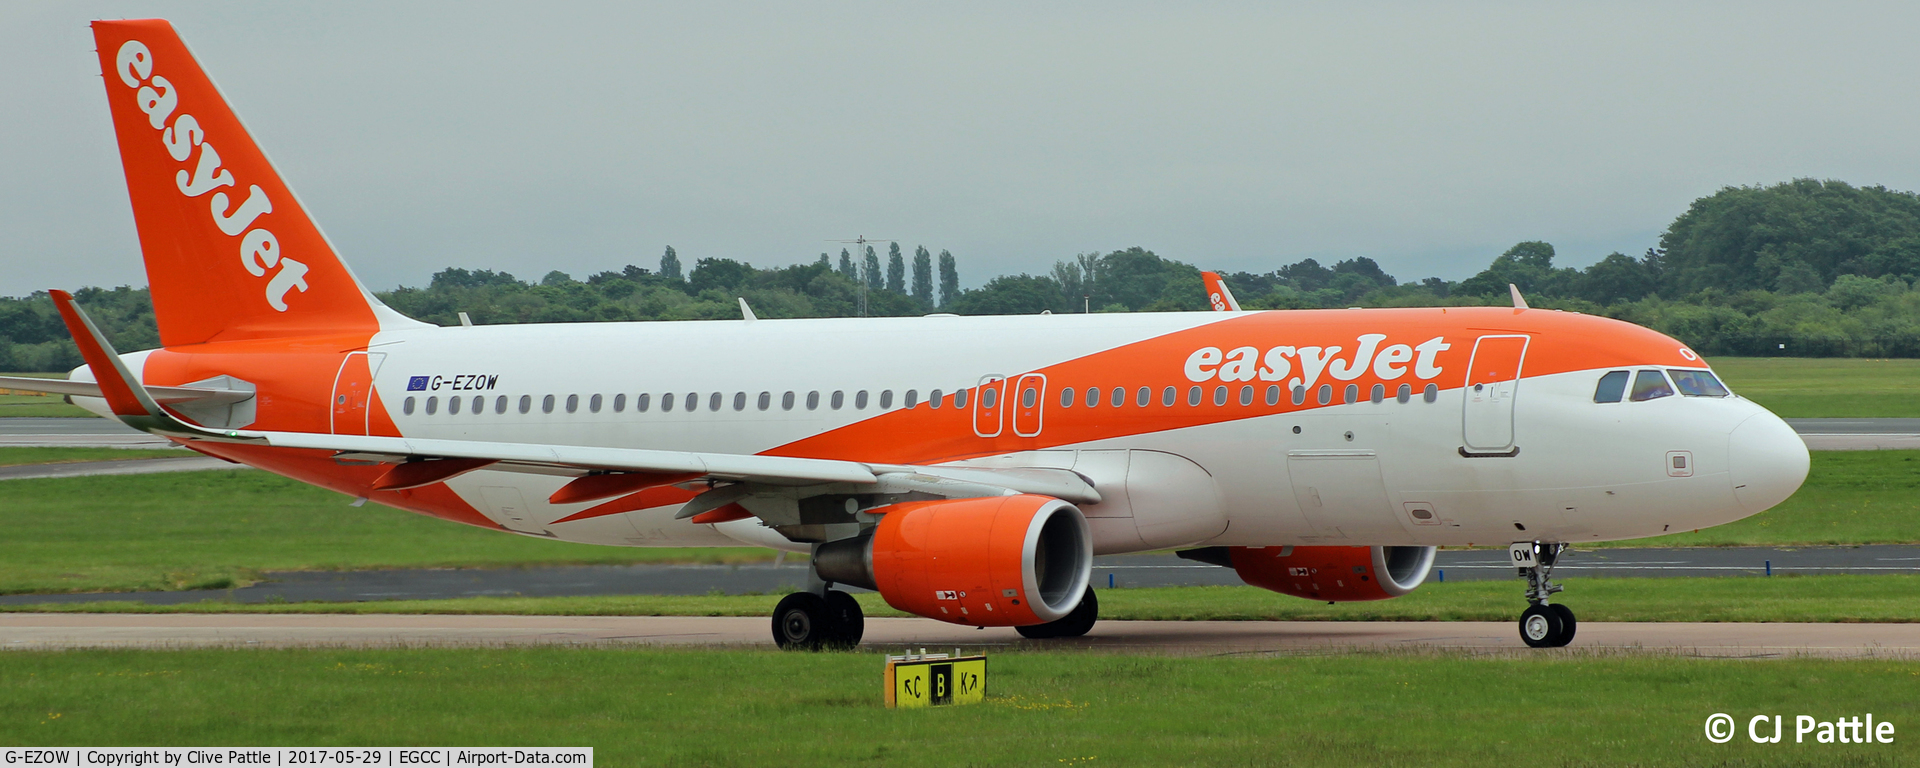 G-EZOW, 2015 Airbus A320-214 C/N 6834, In action at Manchester EGCC